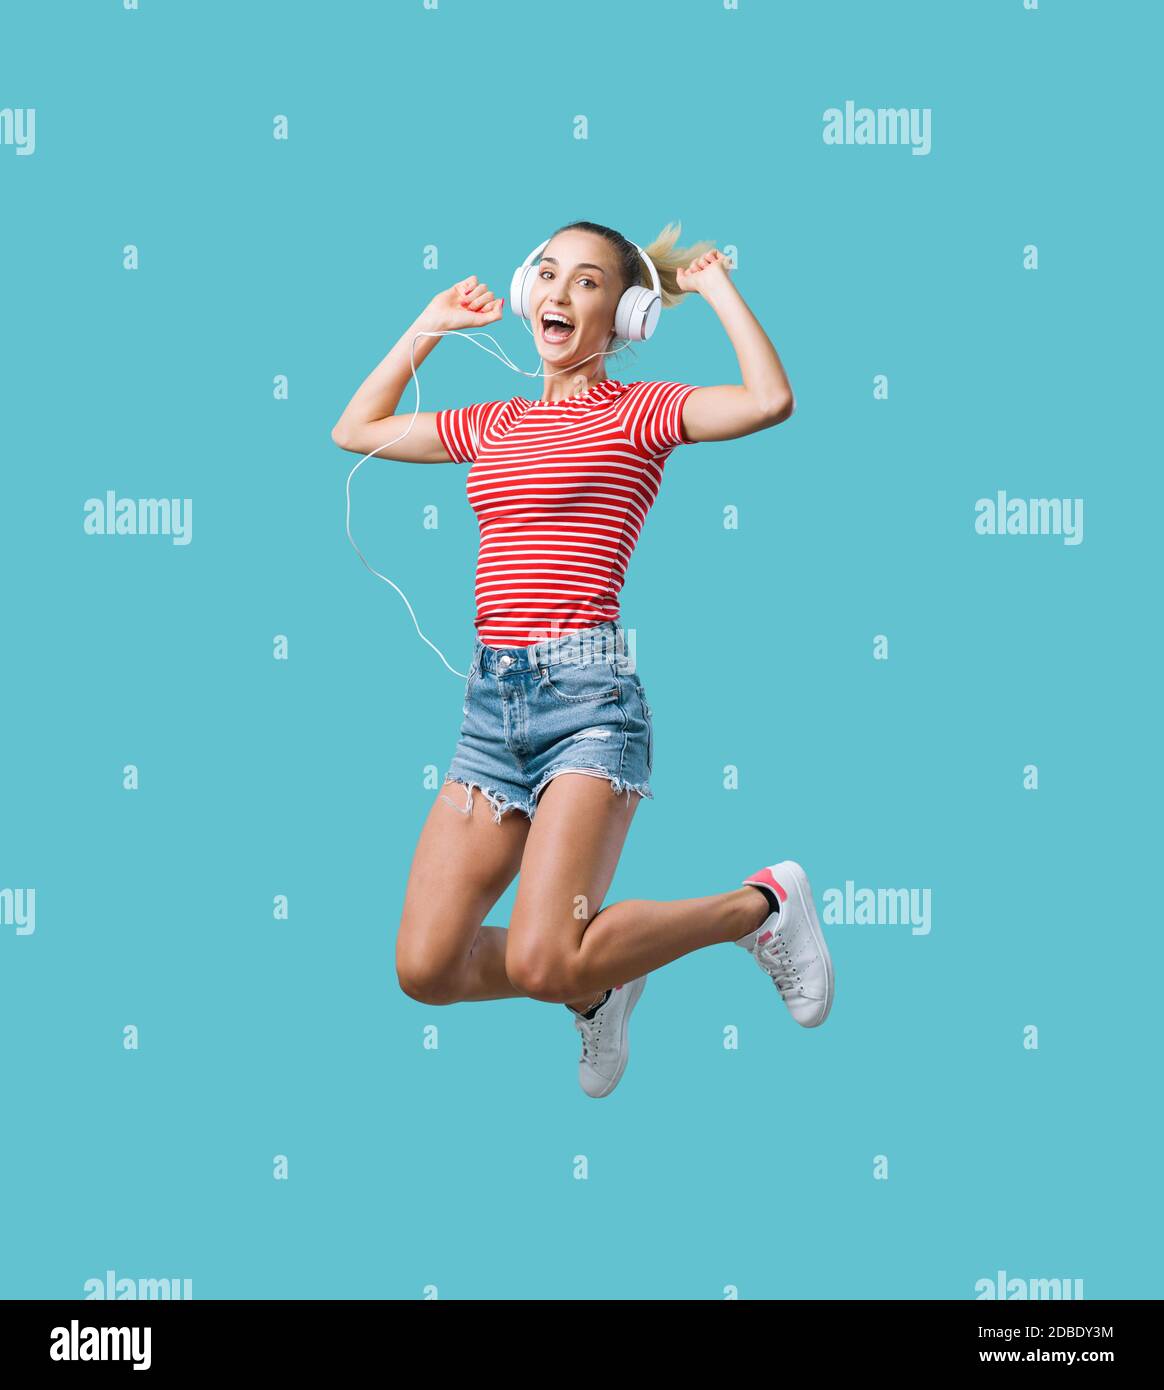 Cheerful young woman wearing headphones and listening to music, she is jumping and feeling excited Stock Photo